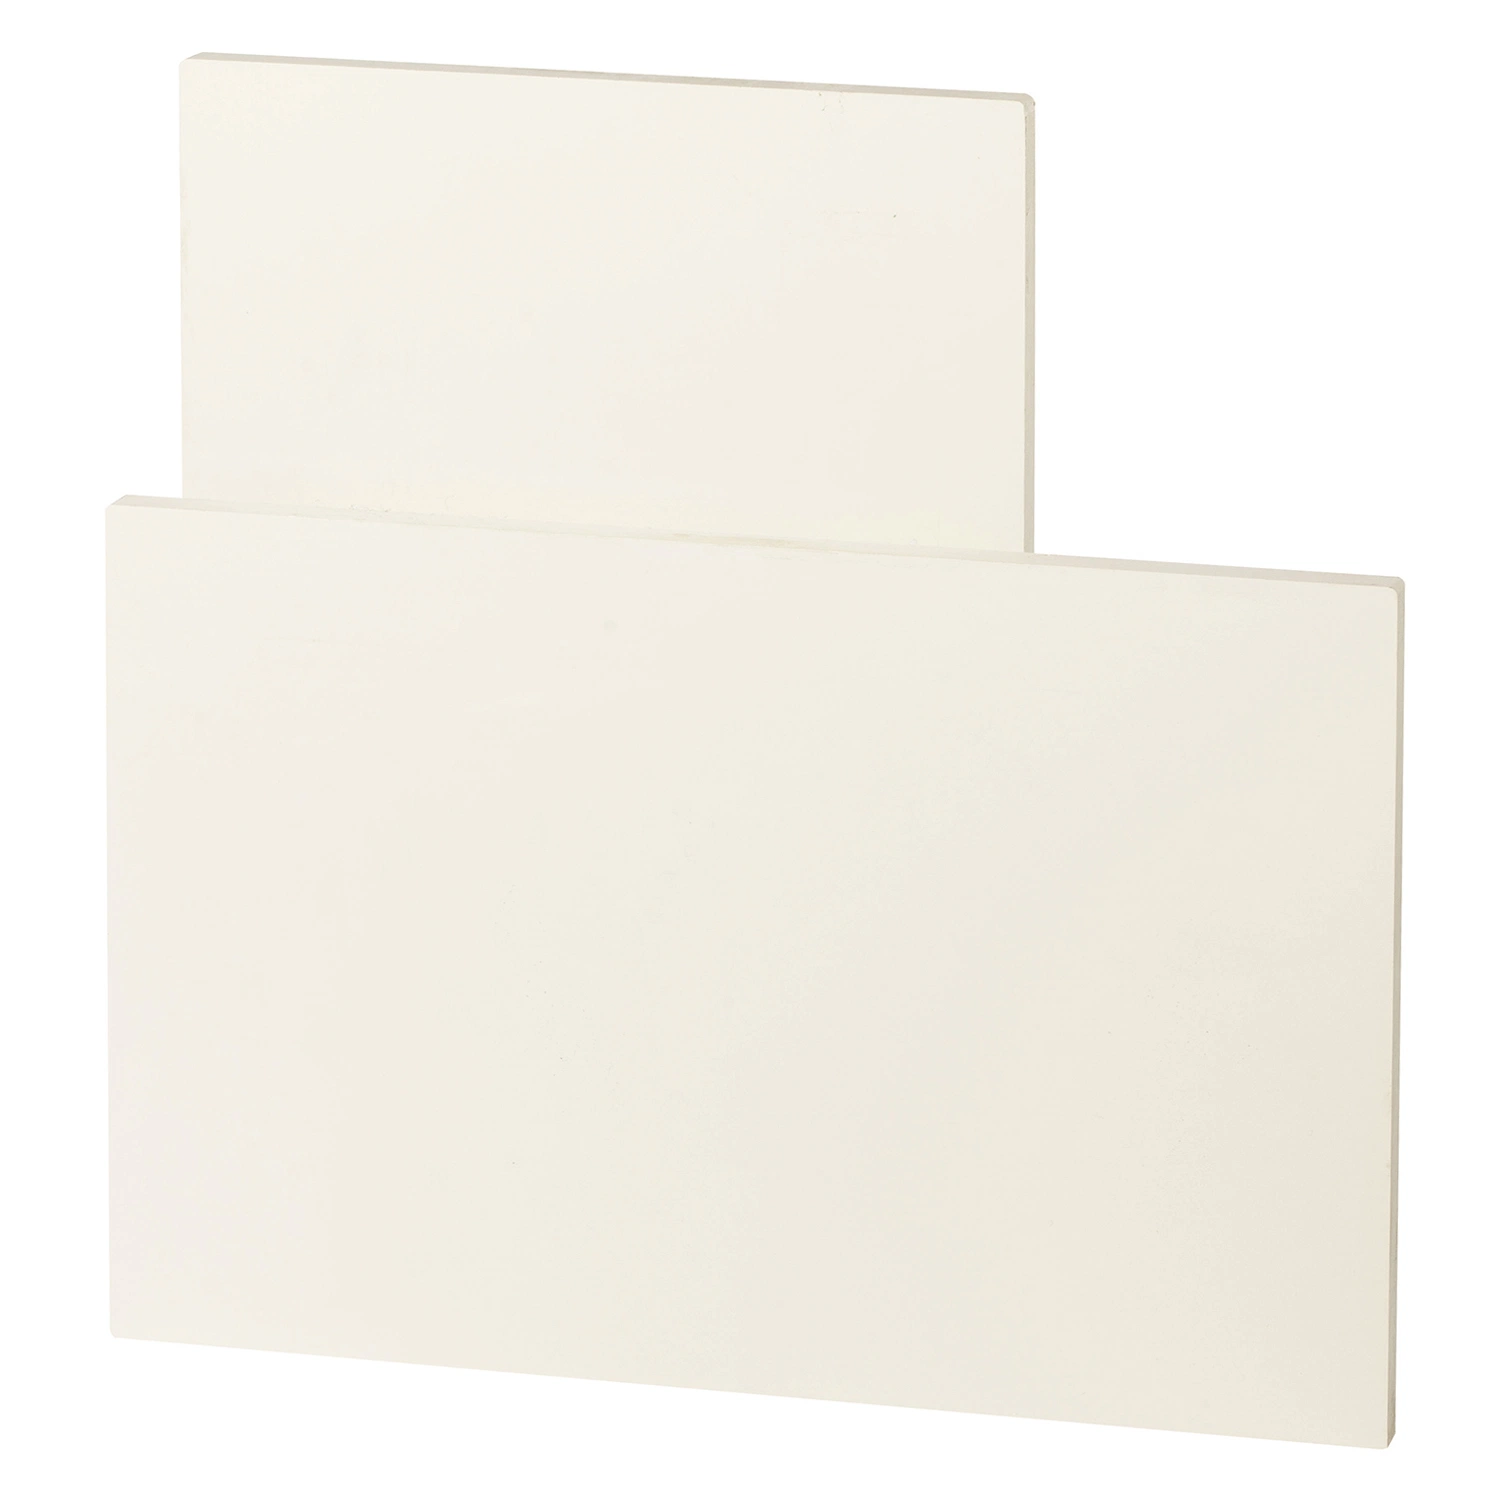 PP Rigid Plate with Fibre Masked Surface White Color